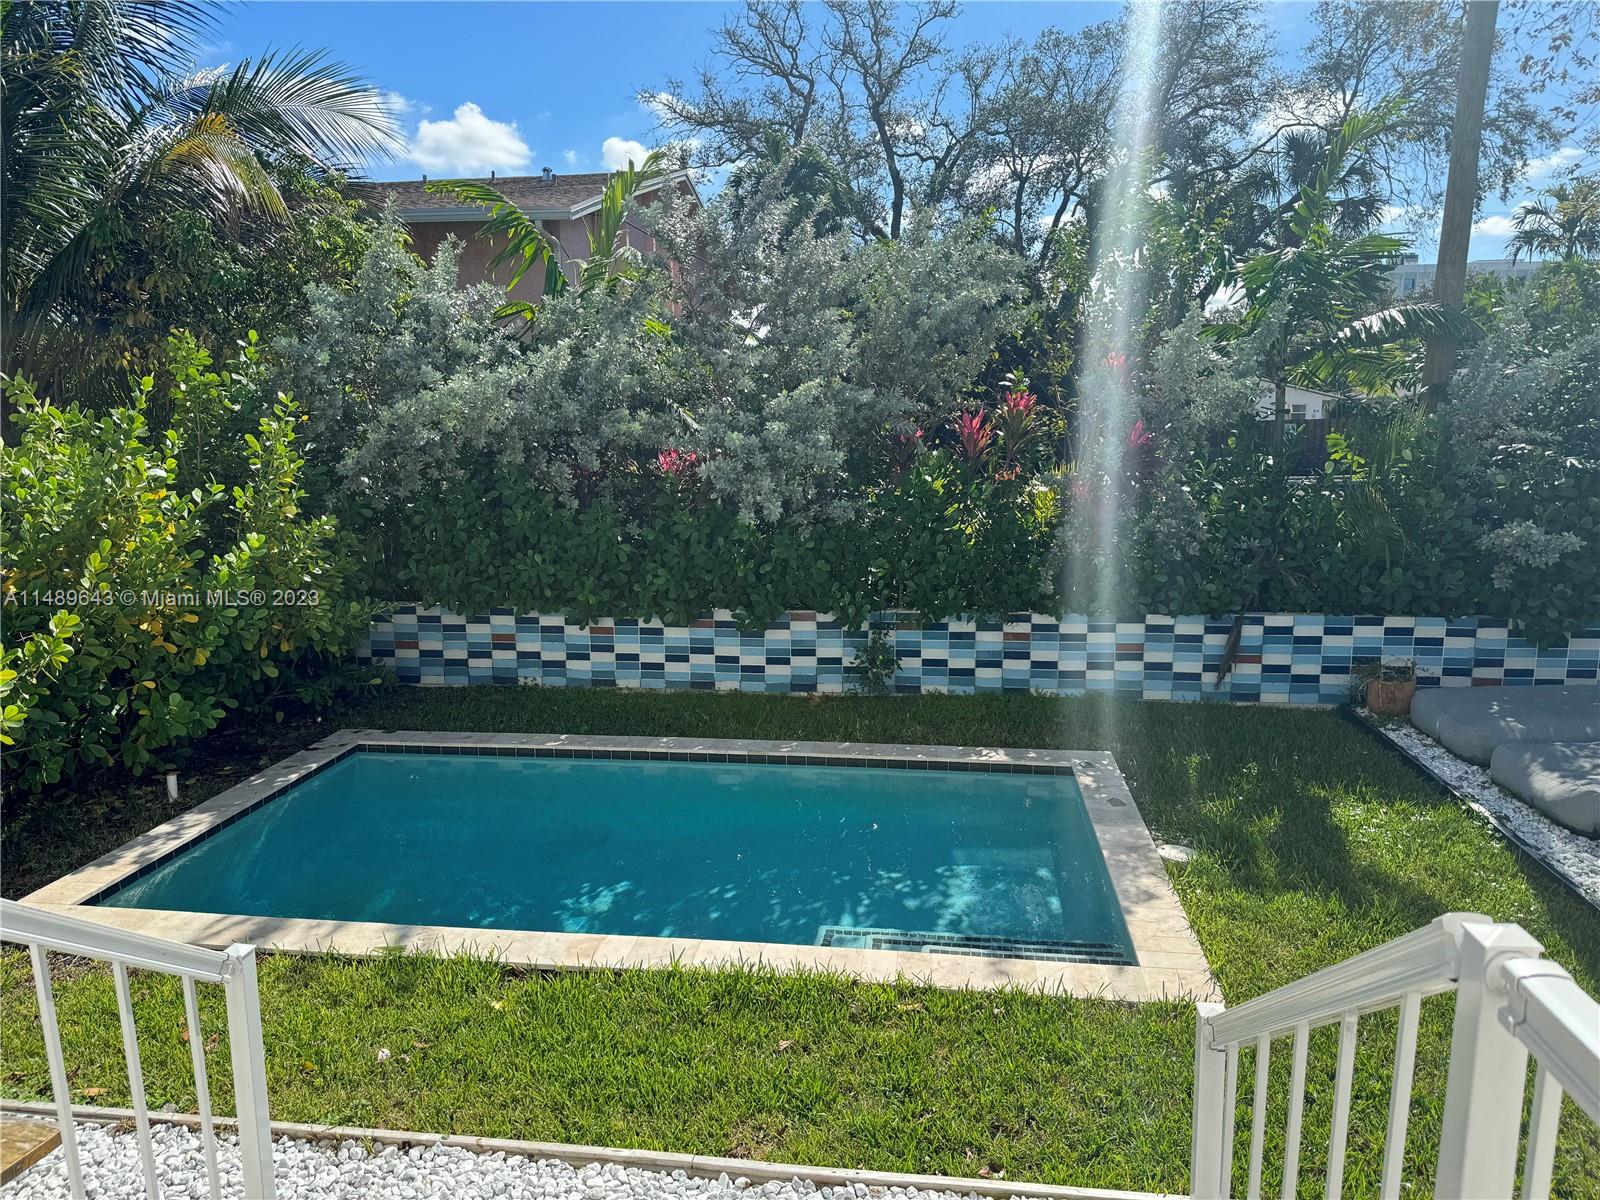 Fort Lauderdale, Florida, 33315, United States, 4 Bedrooms Bedrooms, ,4 BathroomsBathrooms,Residential,For Sale,1404820